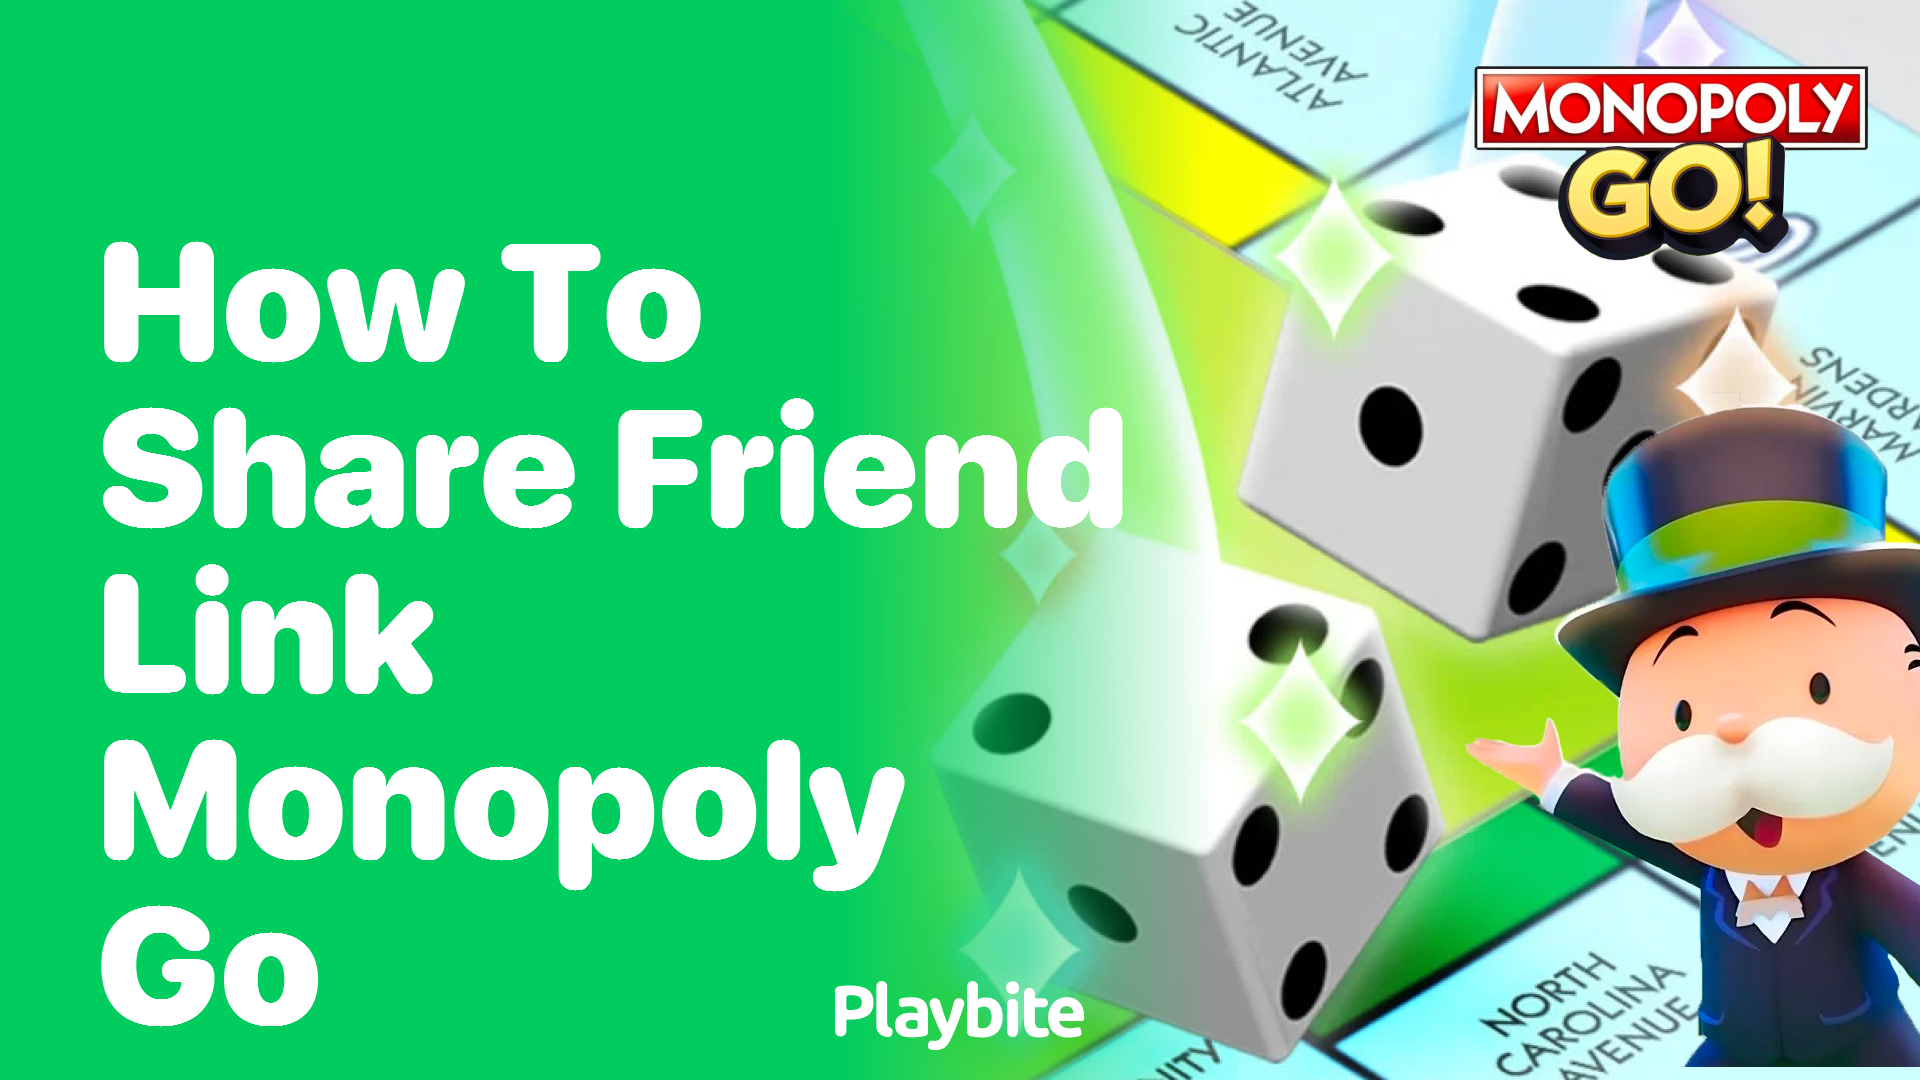 How to Share a Friend Link in Monopoly Go